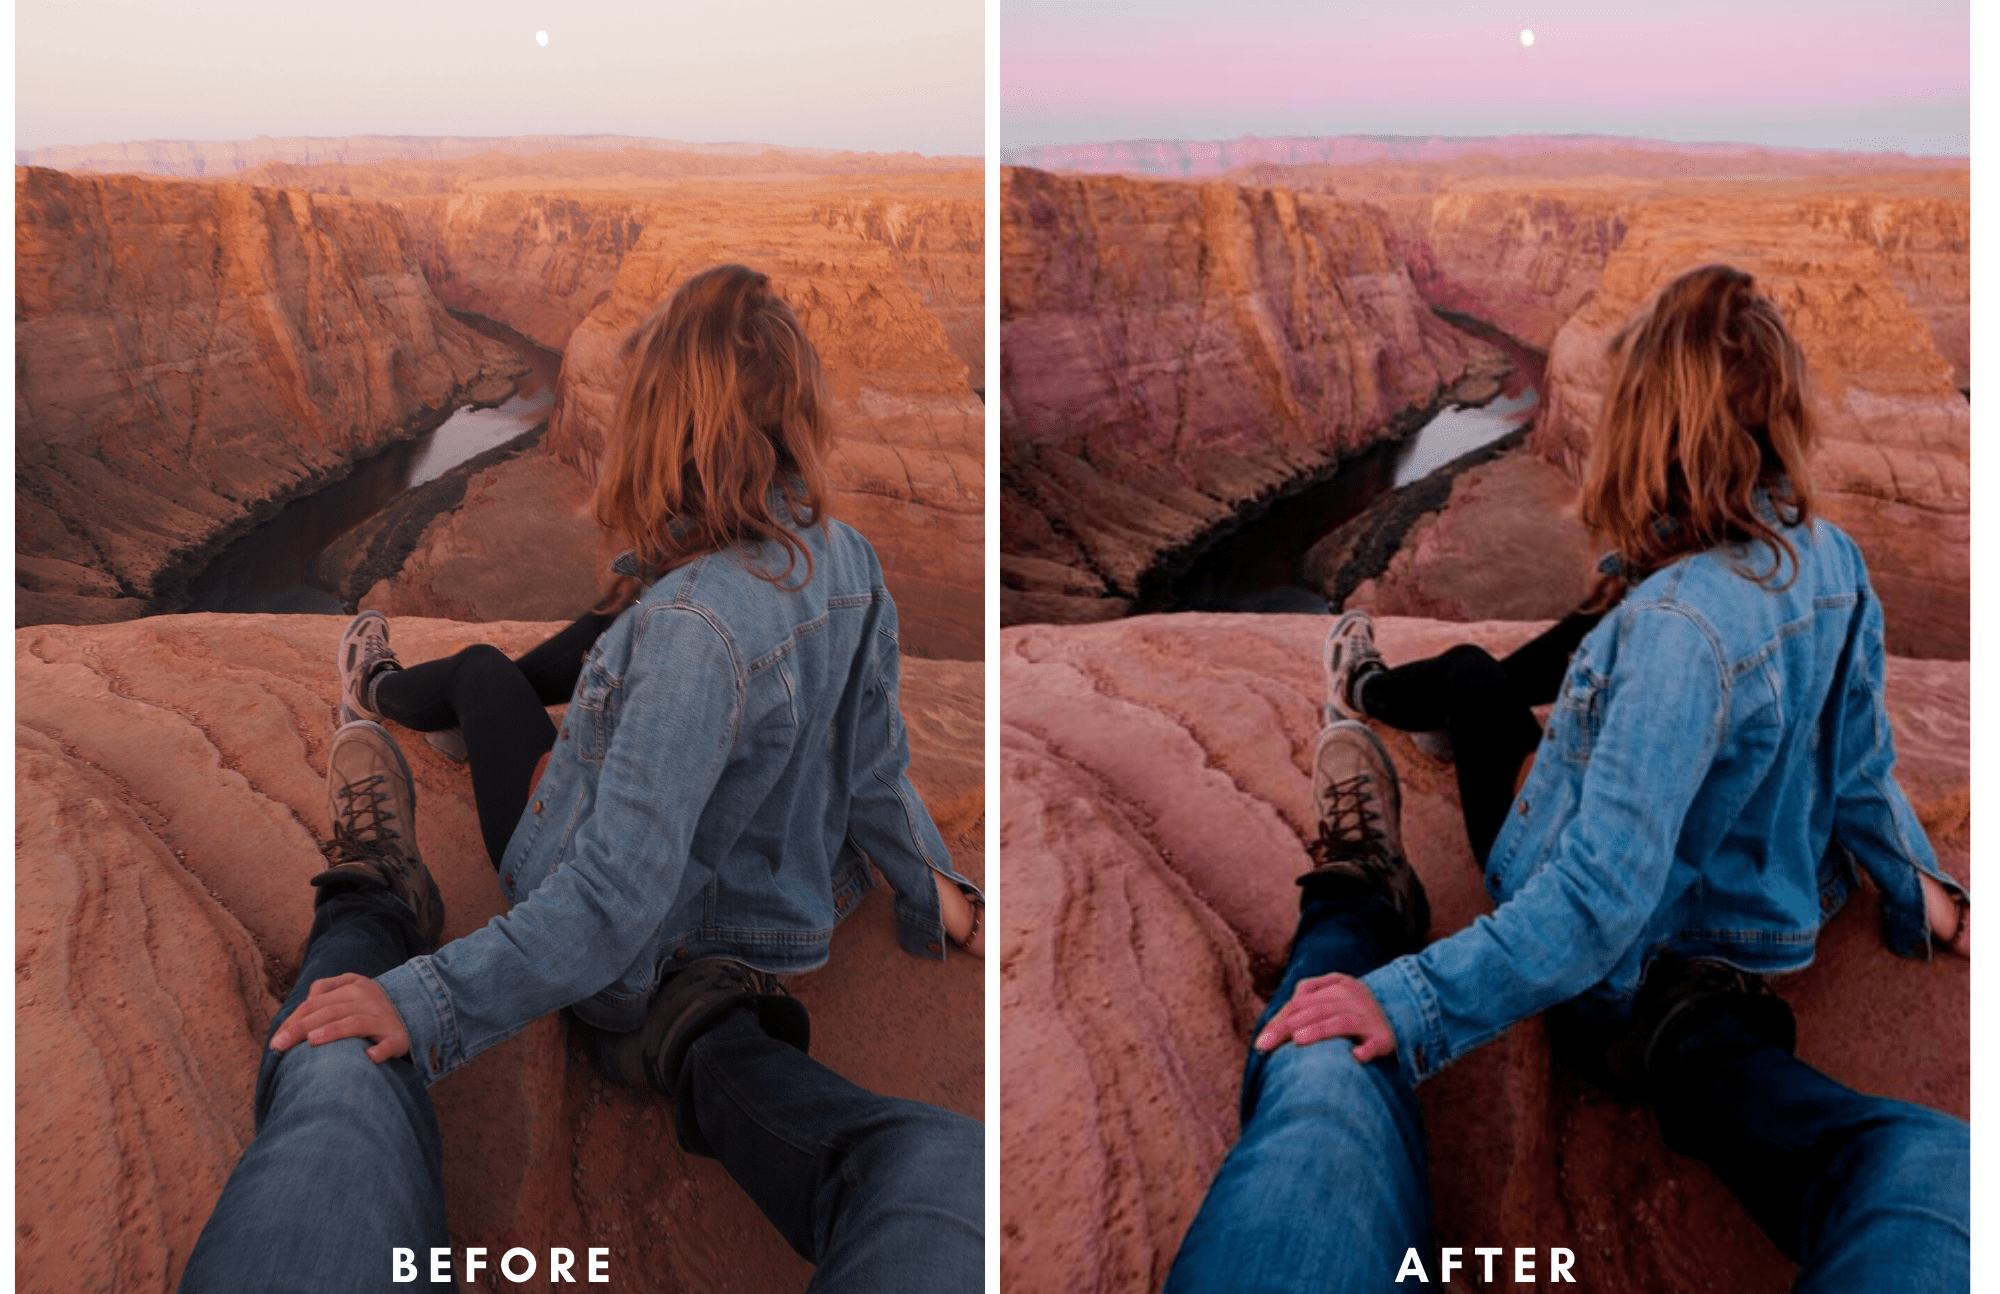 Before and After Wandering Stus Presets